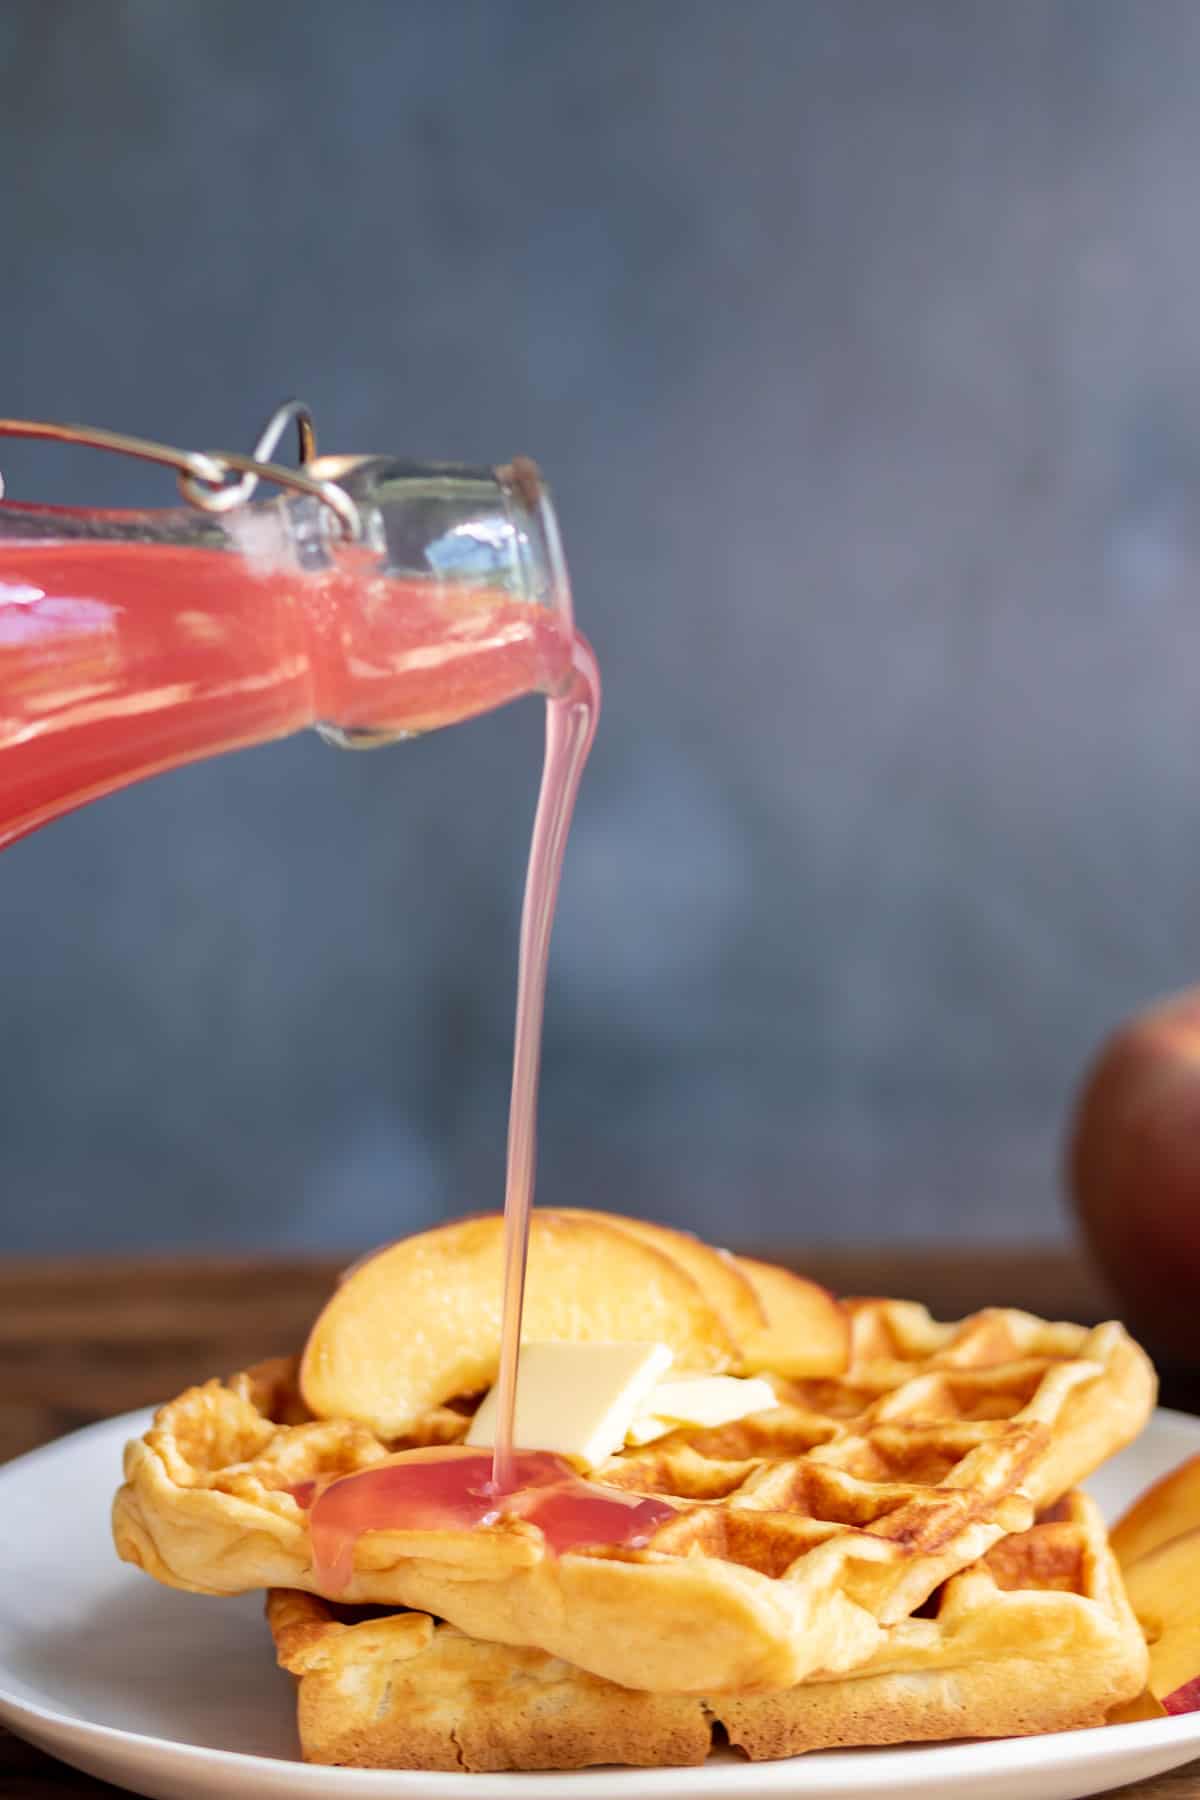 Peach syrup being drizzled onto waffles.